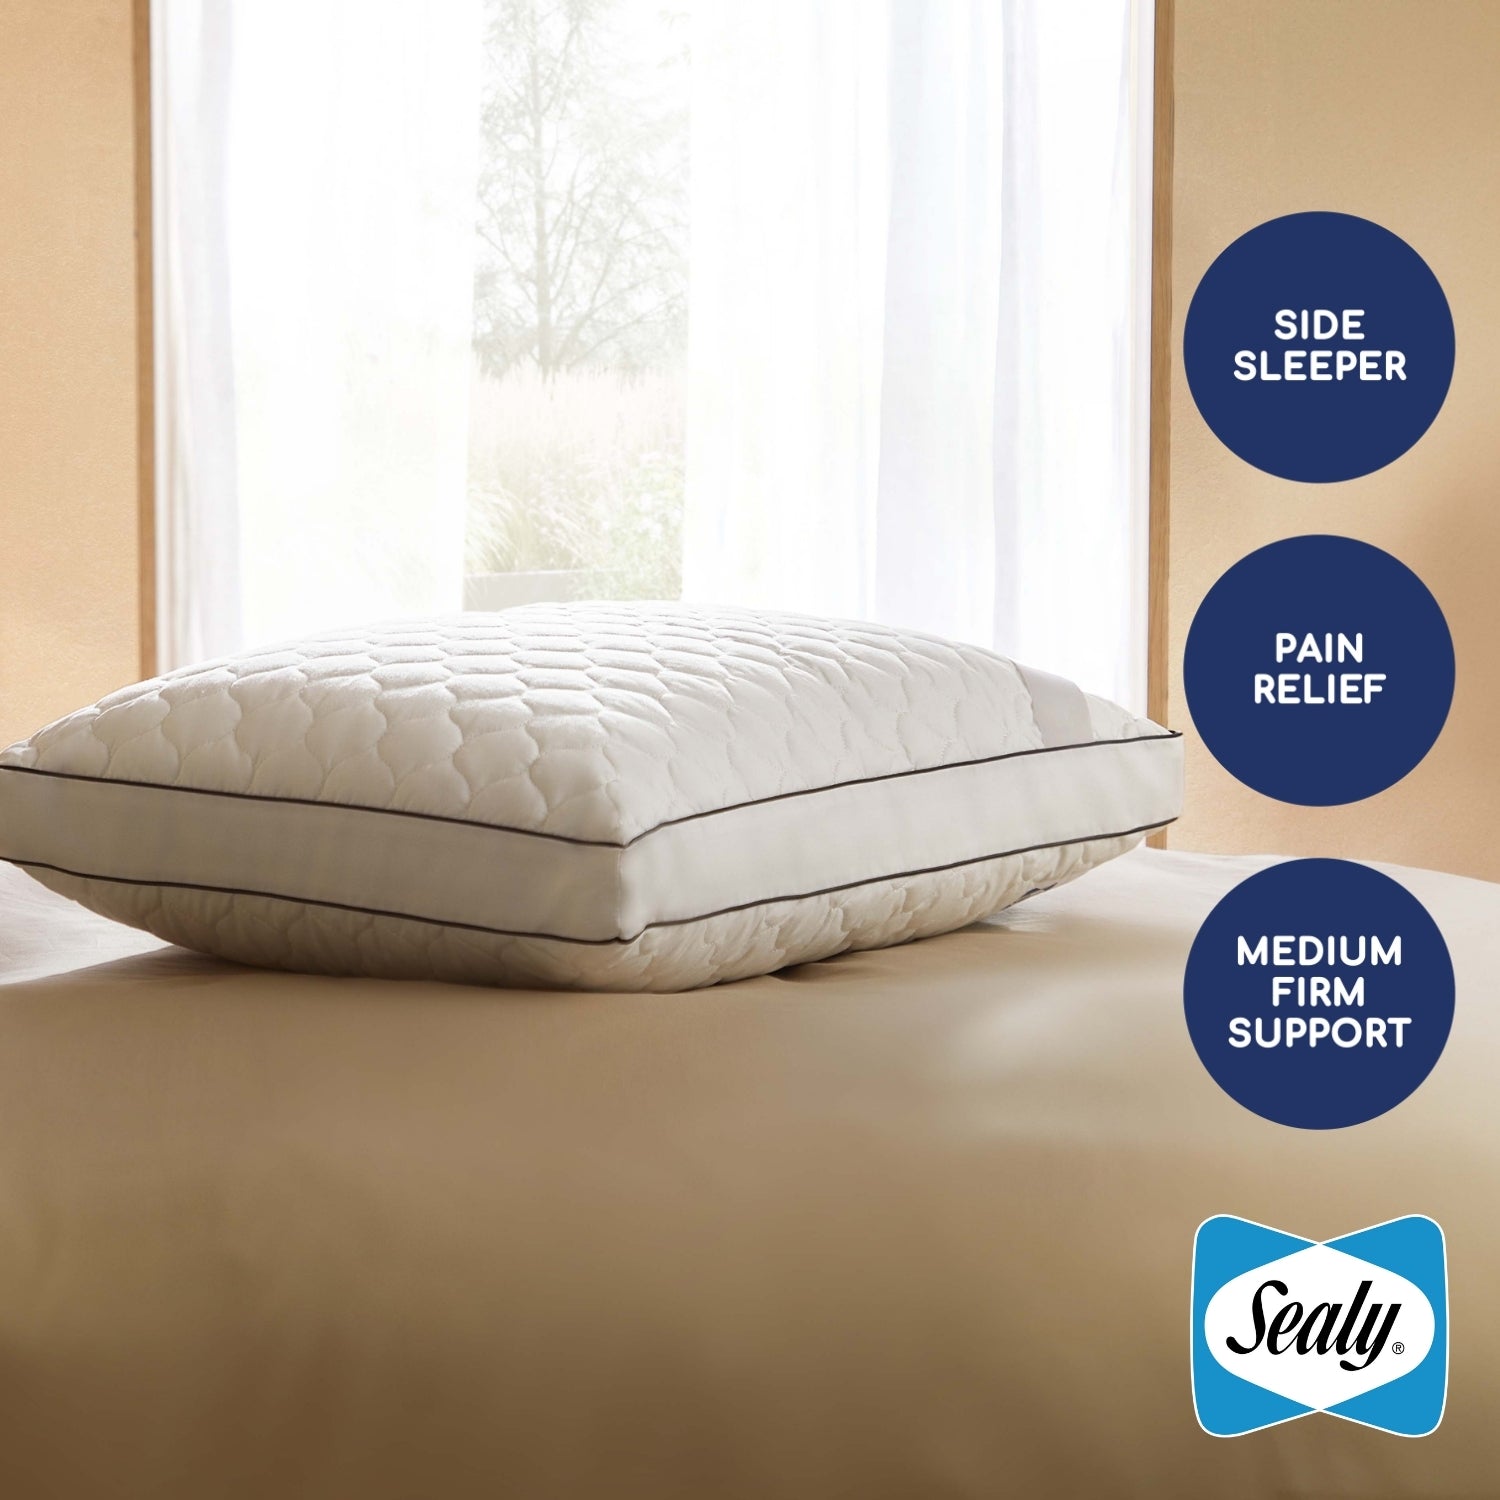 Sealy Side Sleeper Pillow at Pillow World